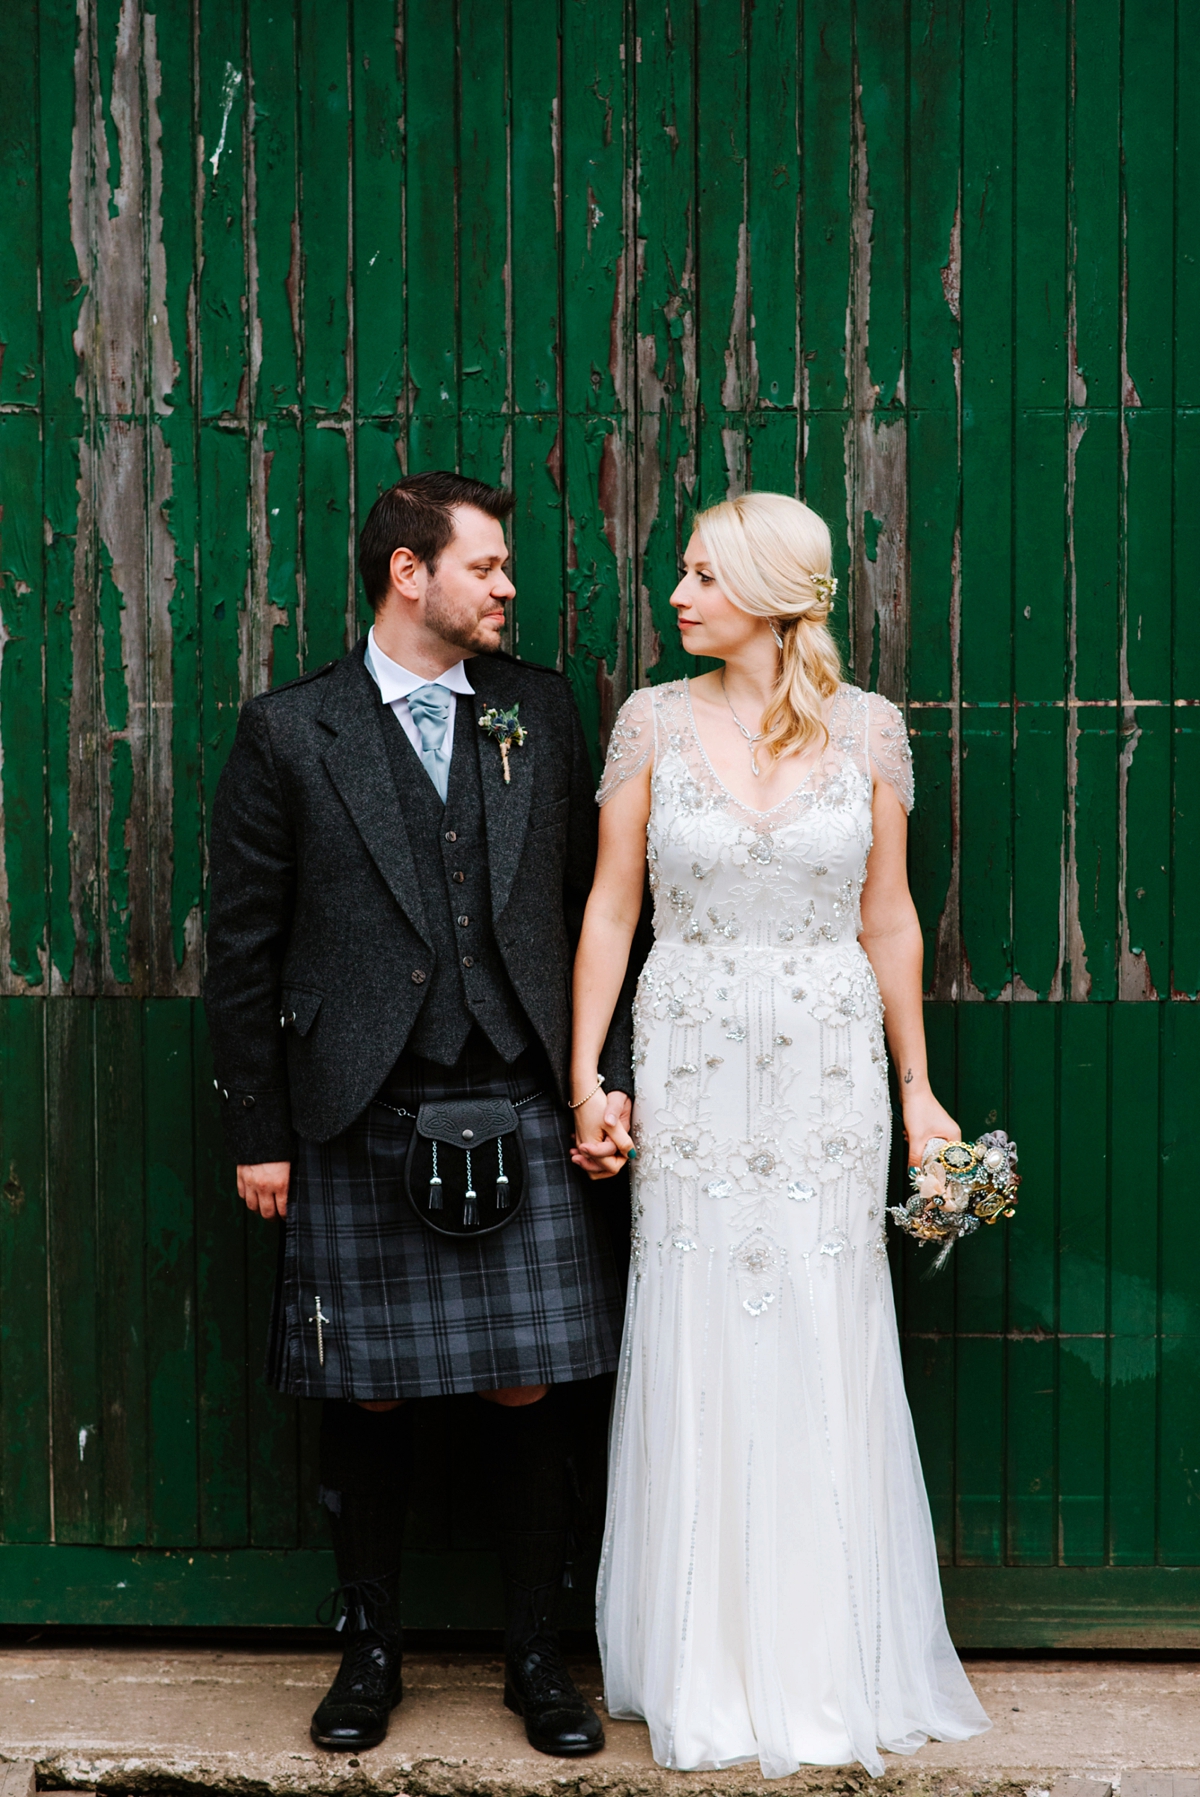 24 A Jenny Packham beaded gown for a lovely laidback country barn wedding